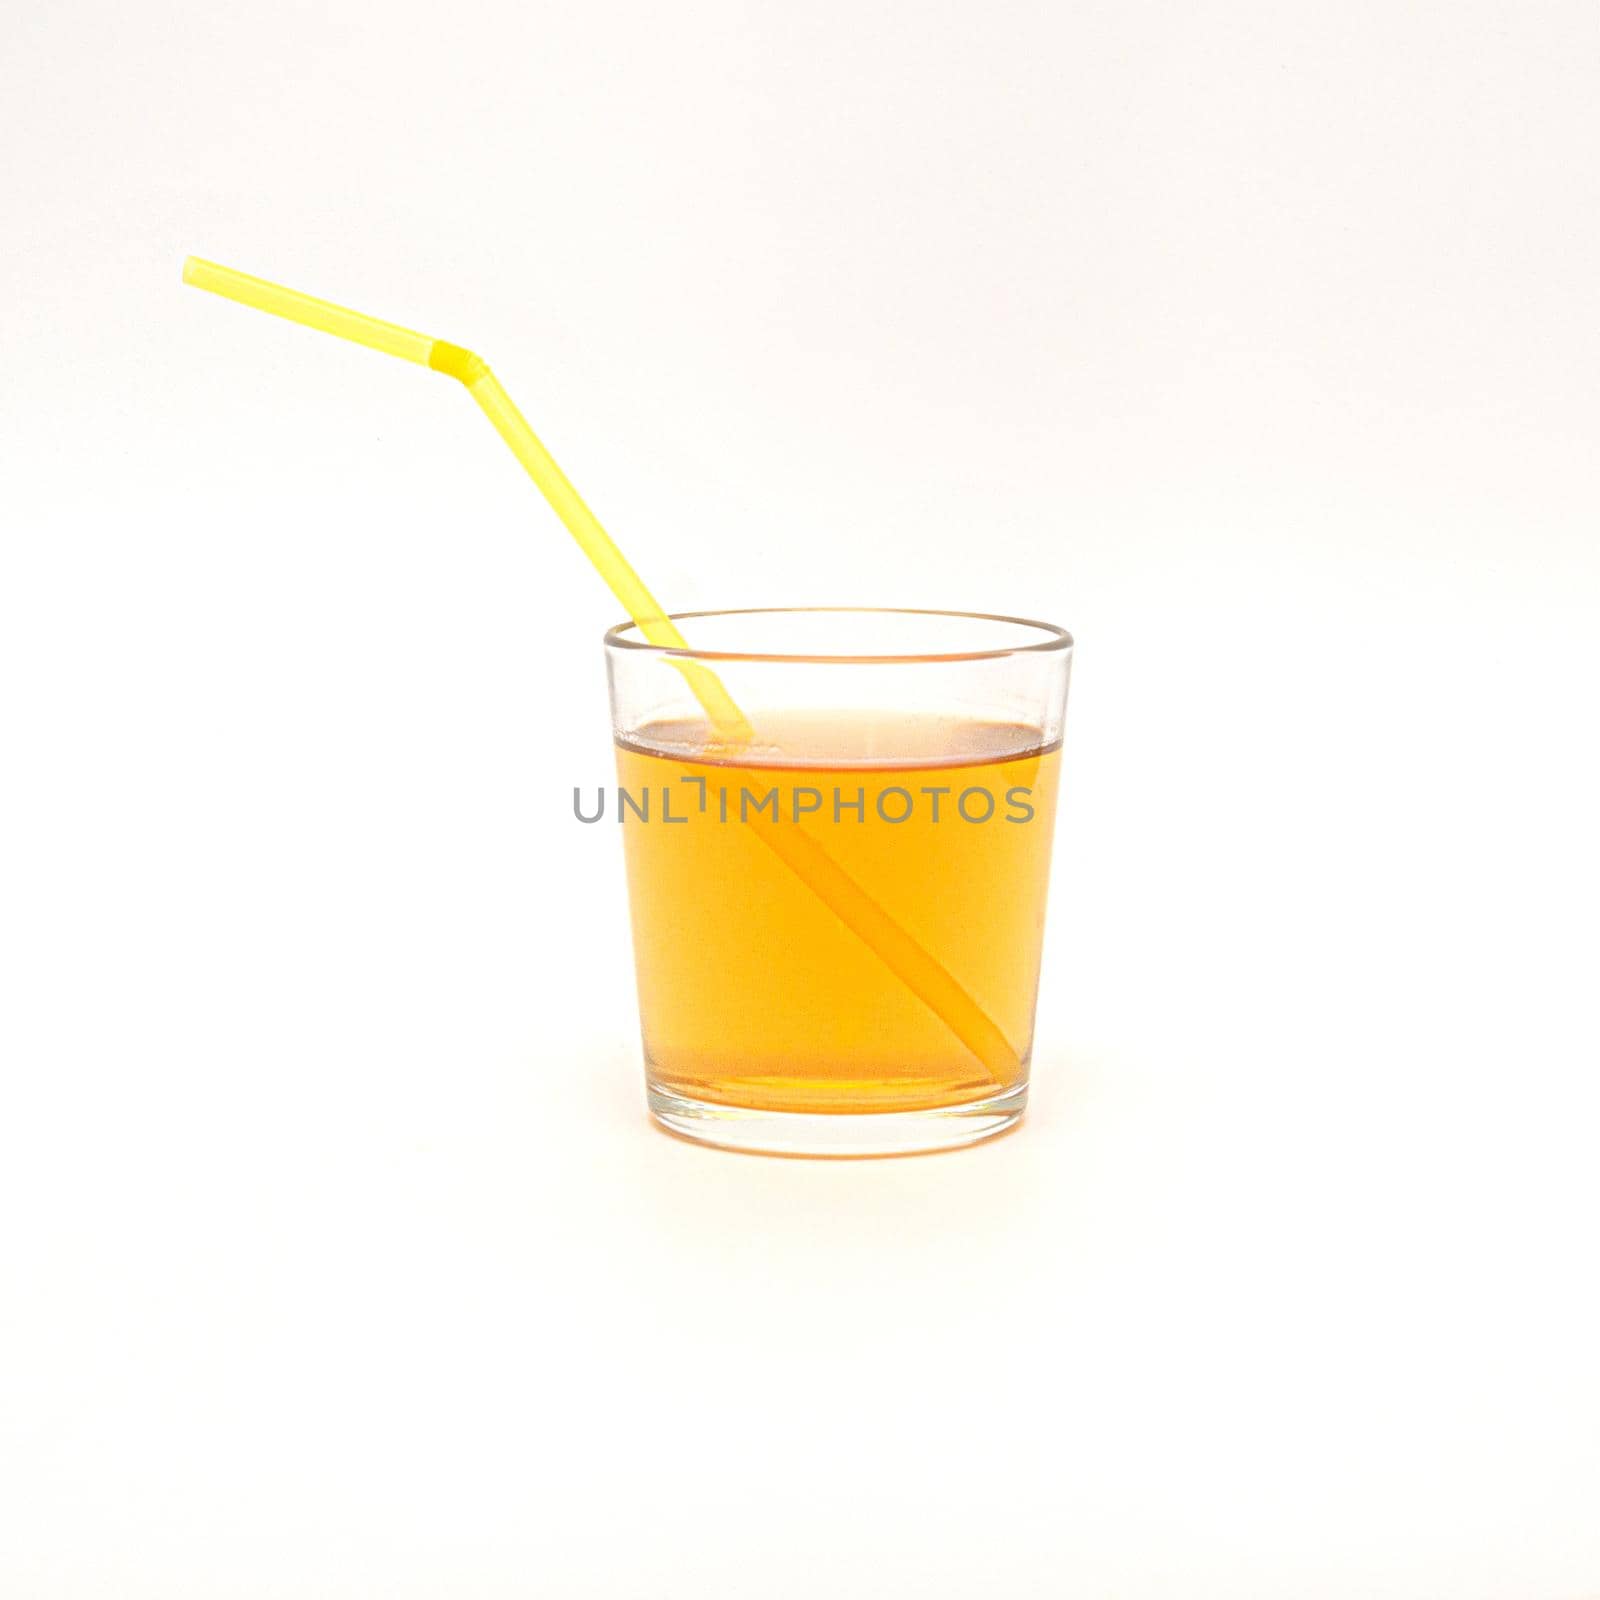 a glass of apple juice with a straws isolated on a white background,